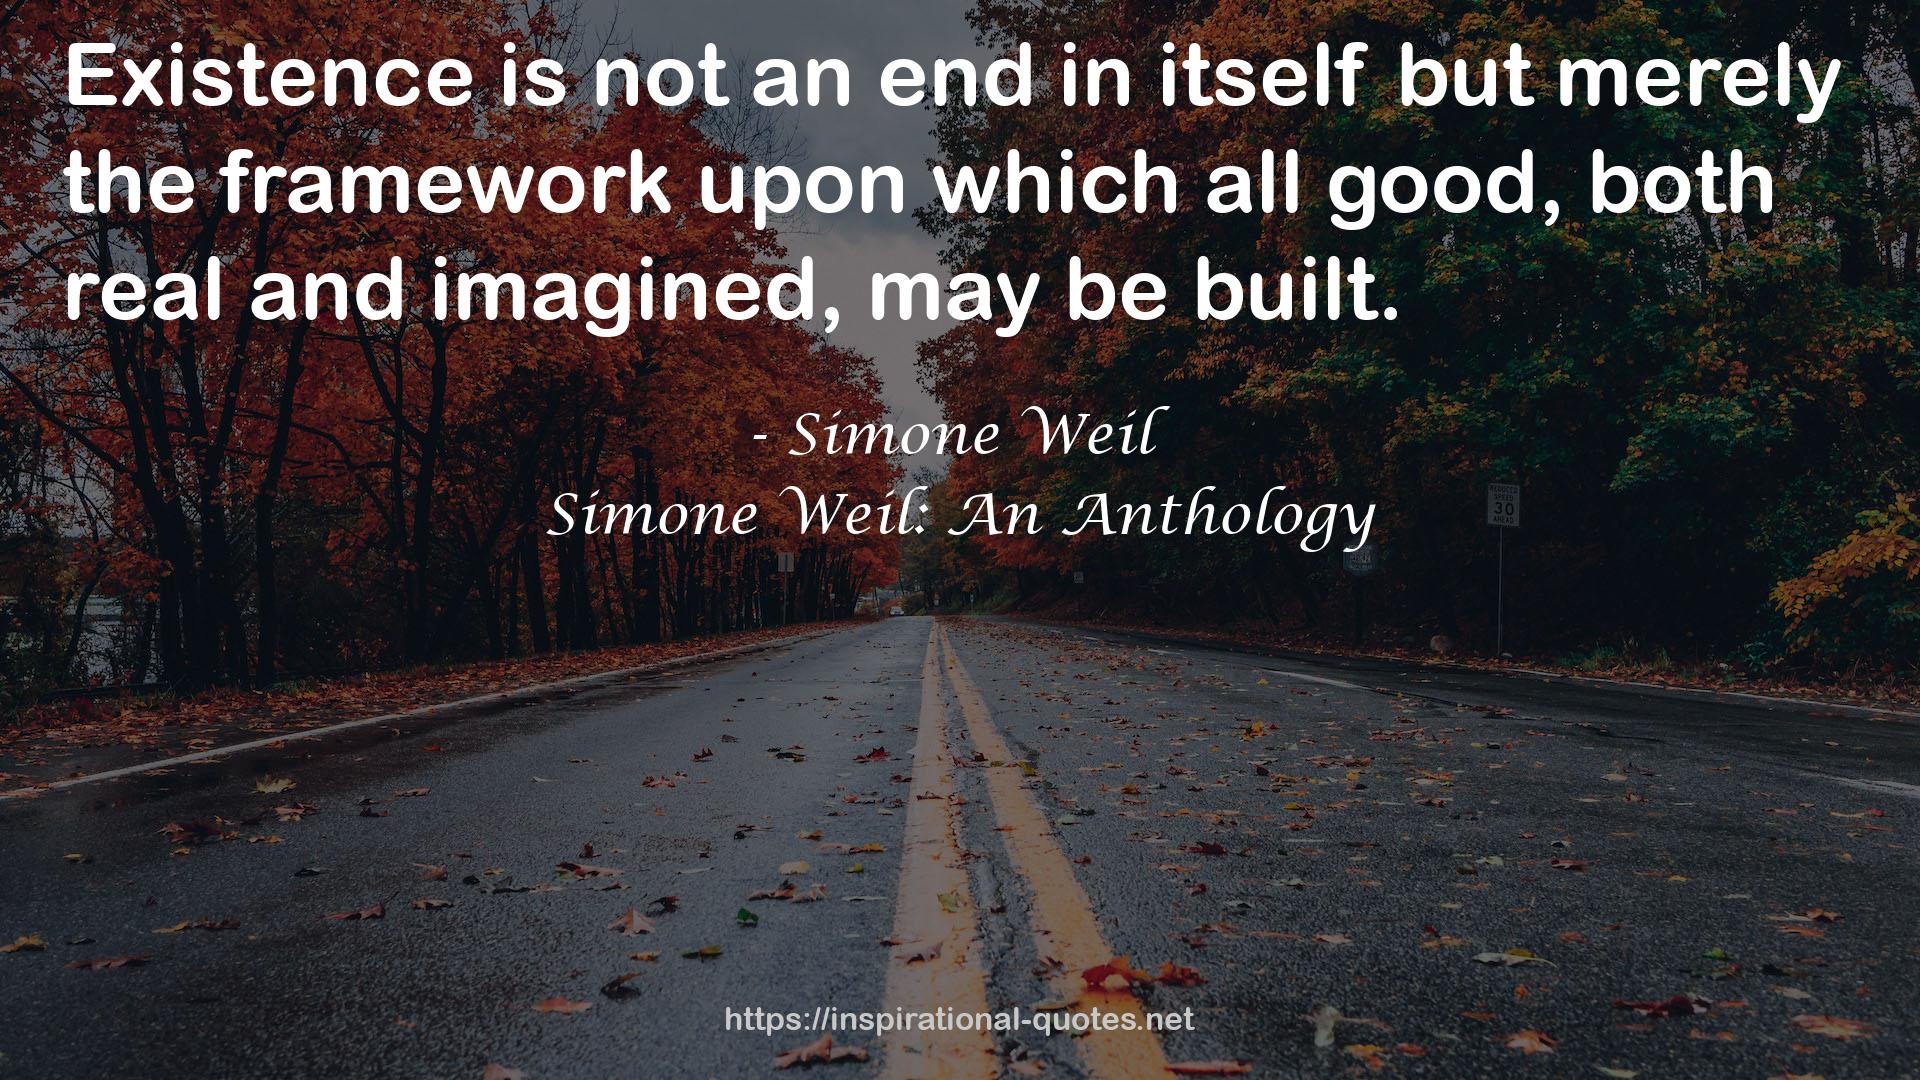 Simone Weil: An Anthology QUOTES